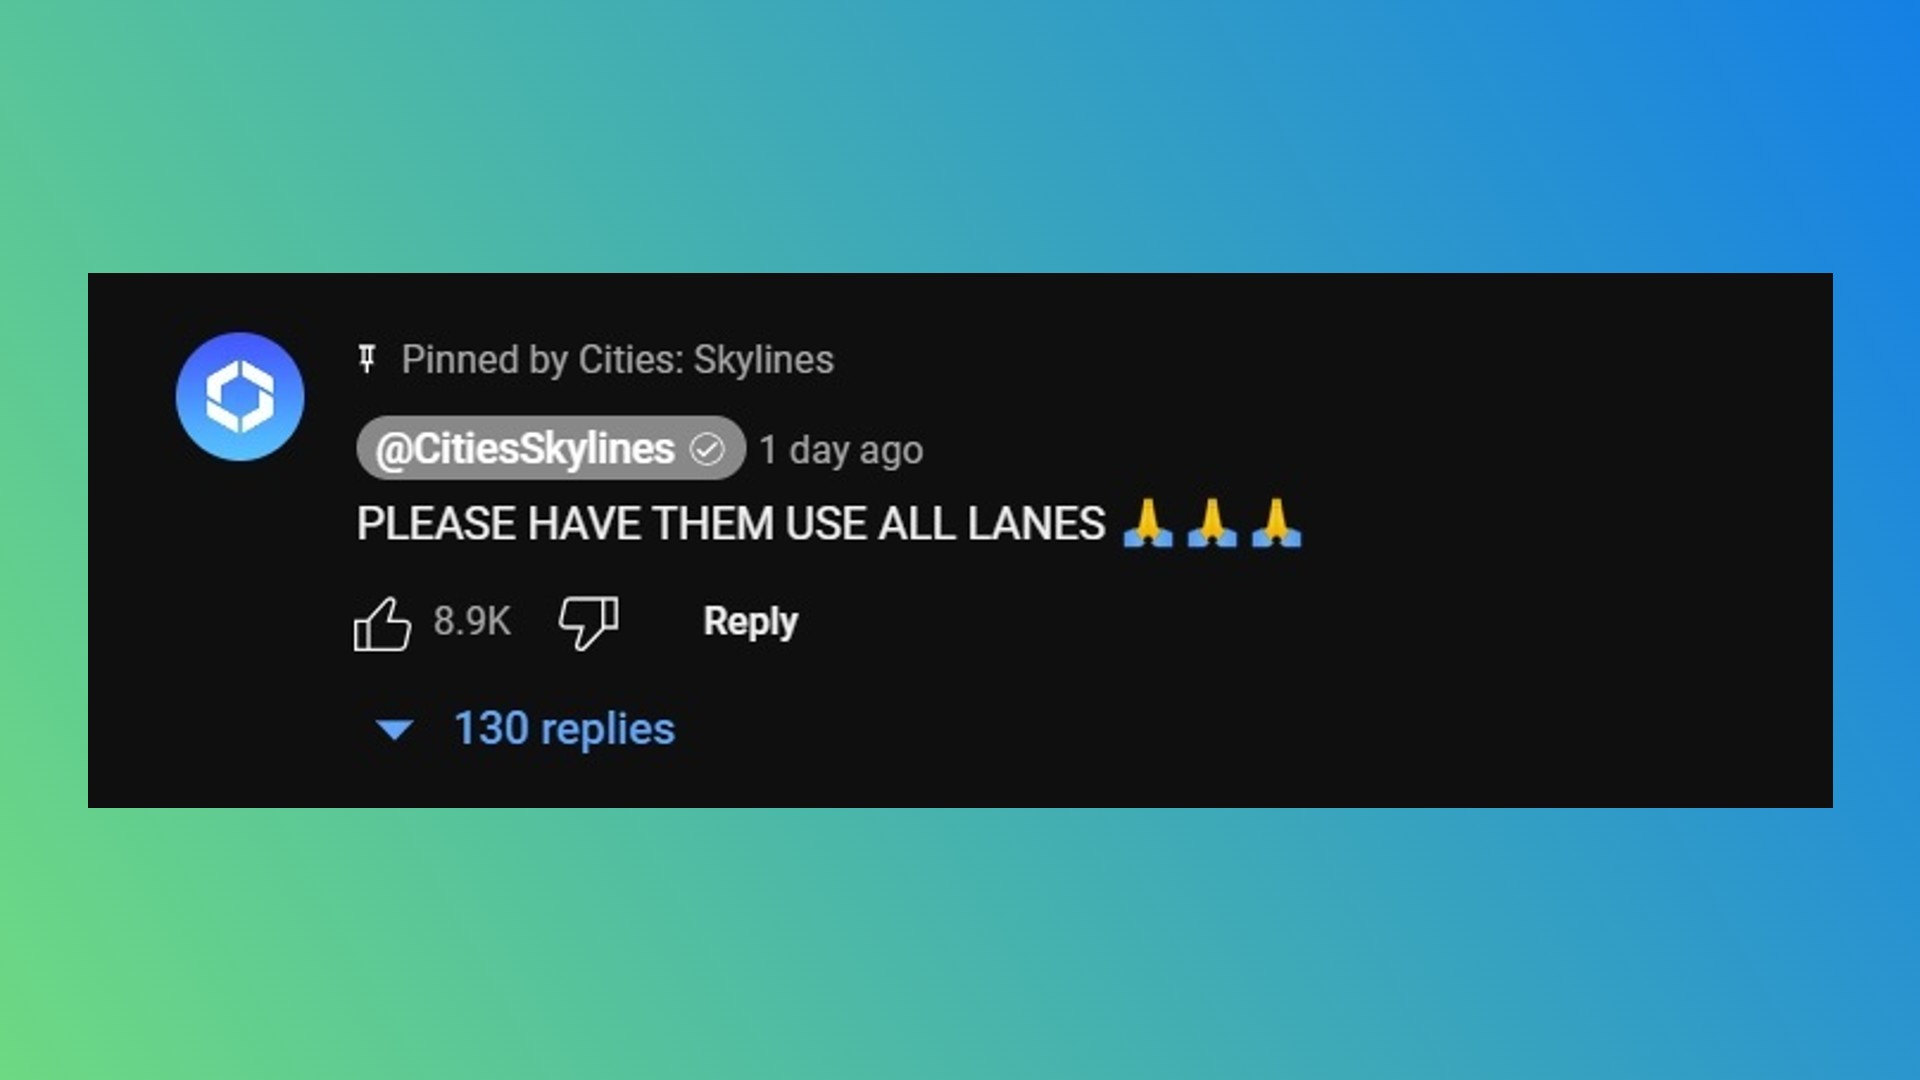 Cities Skylines 2 lanes: A comment on Cities Skylines 2 gameplay, the city-building game from Colossal Order